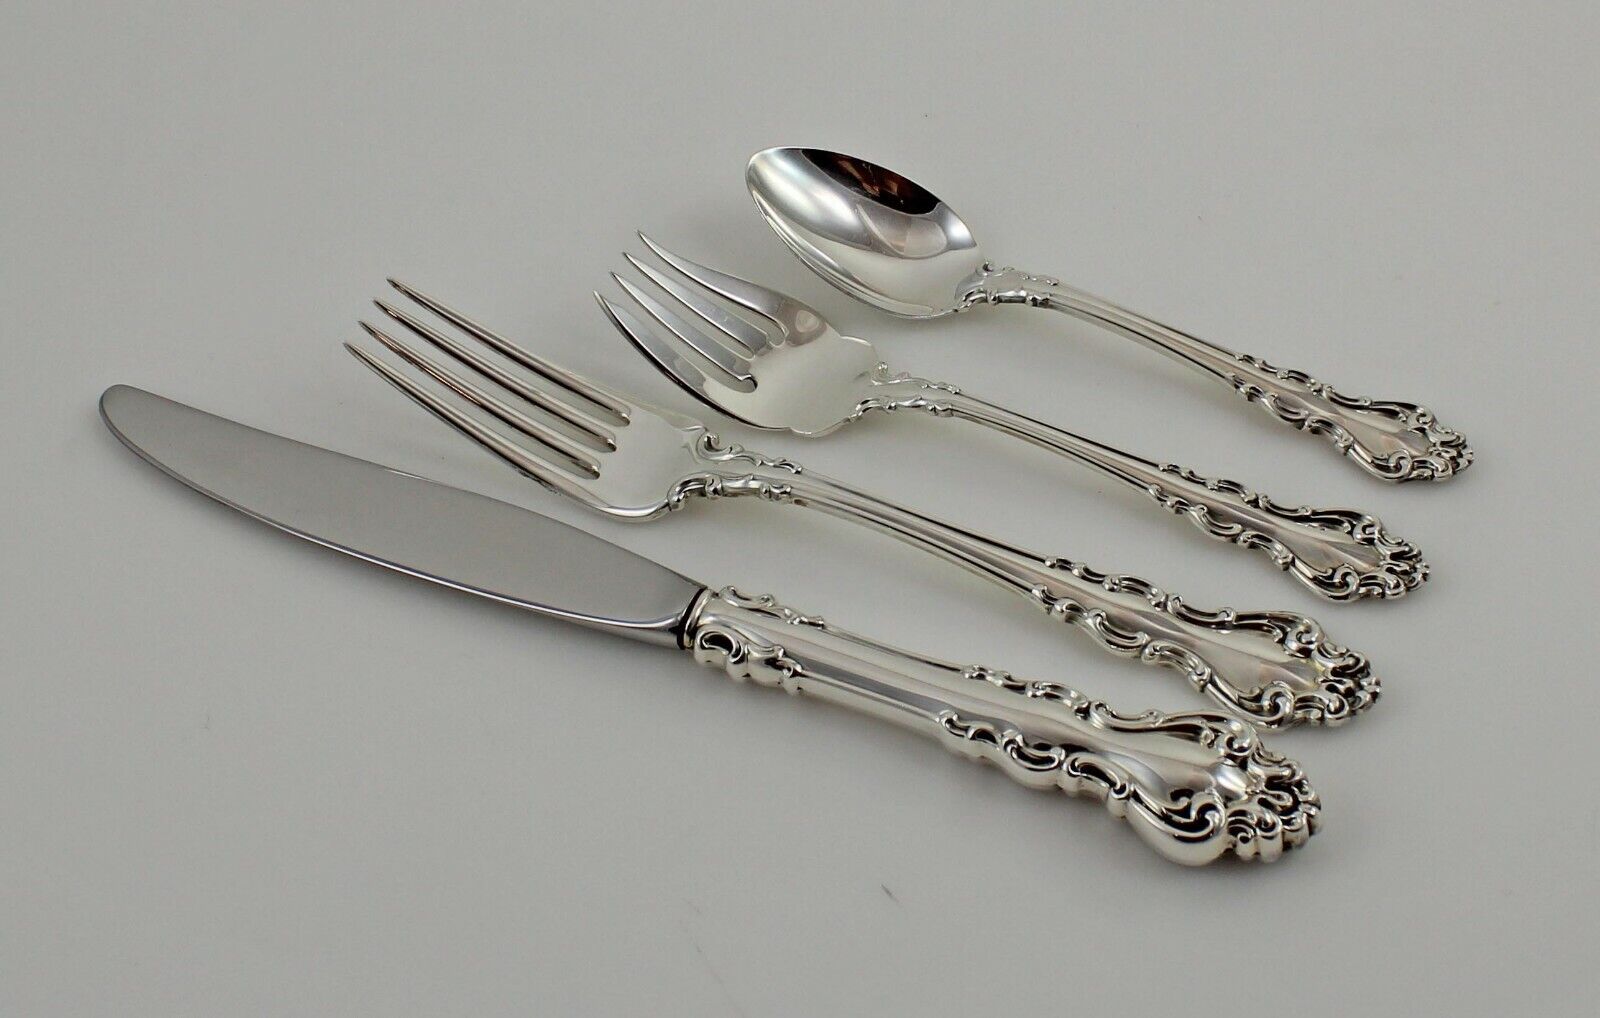 Reed & Barton Spanish Baroque Sterling Silver 4 Piece Place Setting -Dinner Size